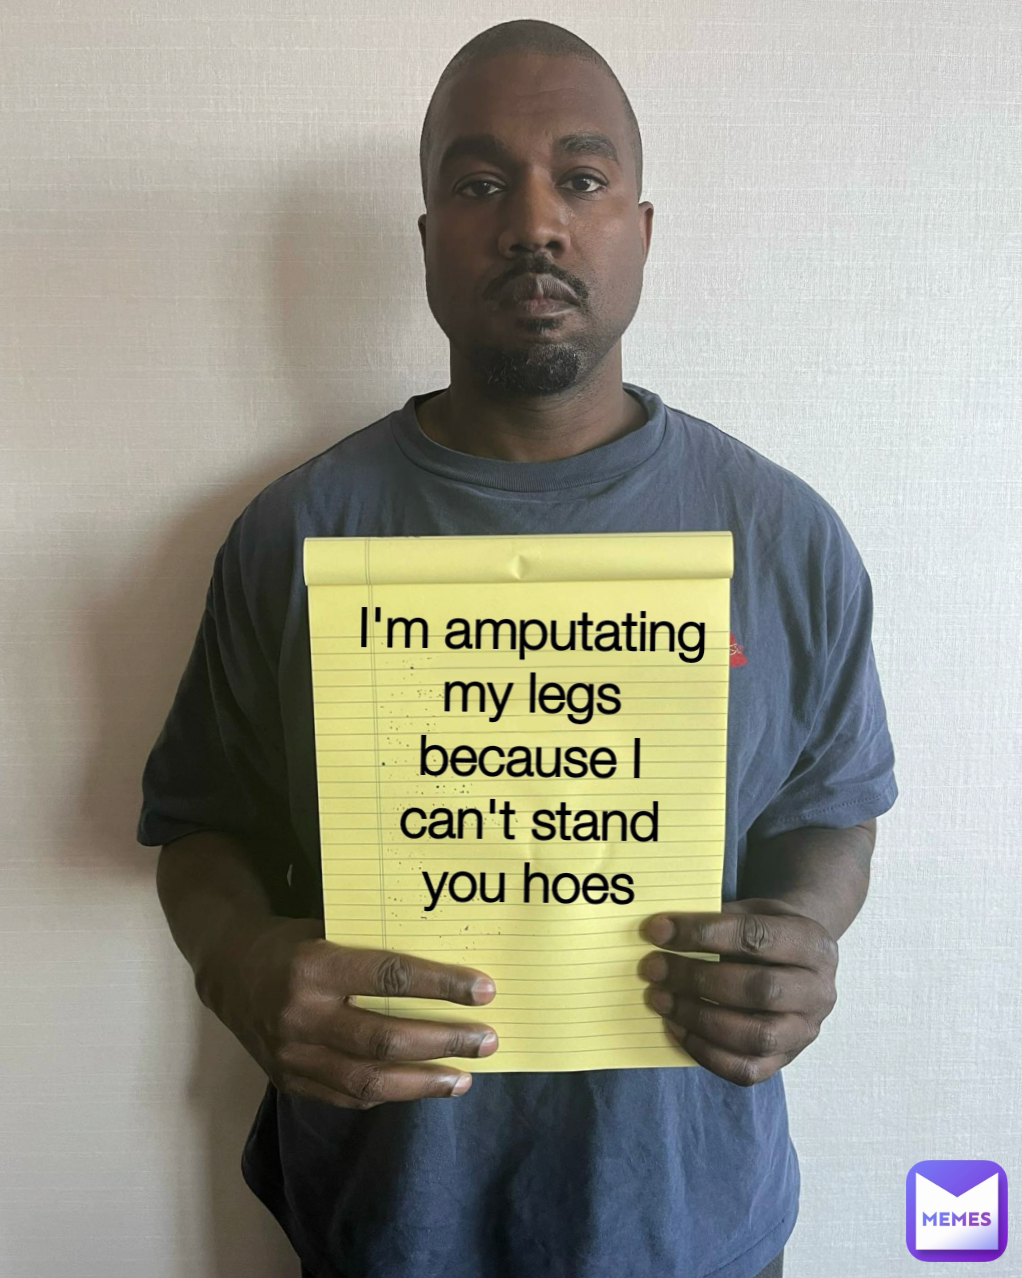 I'm amputating my legs because I can't stand you hoes
